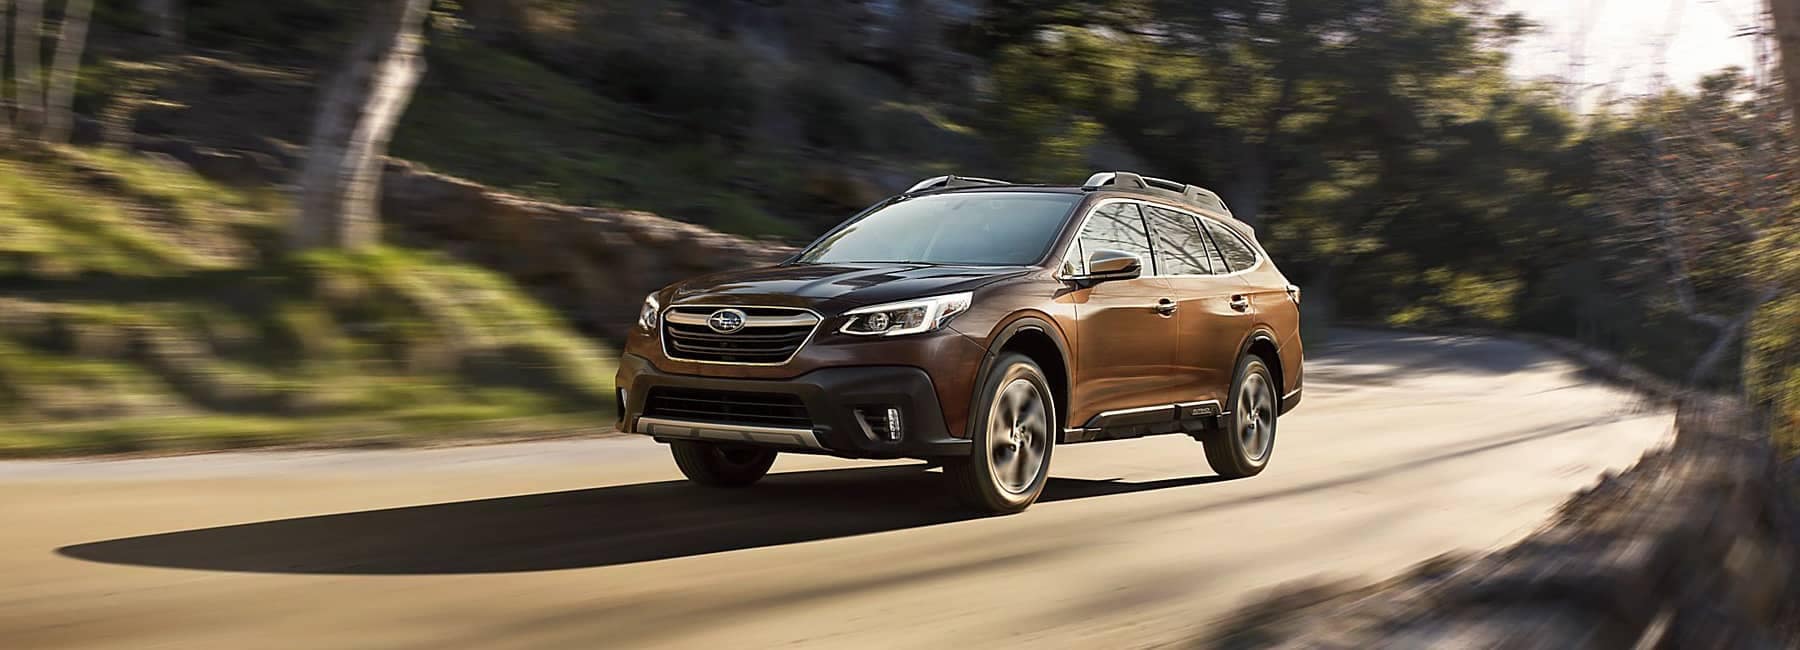 2022 Subaru Outback side 3 quarter driving down forest road